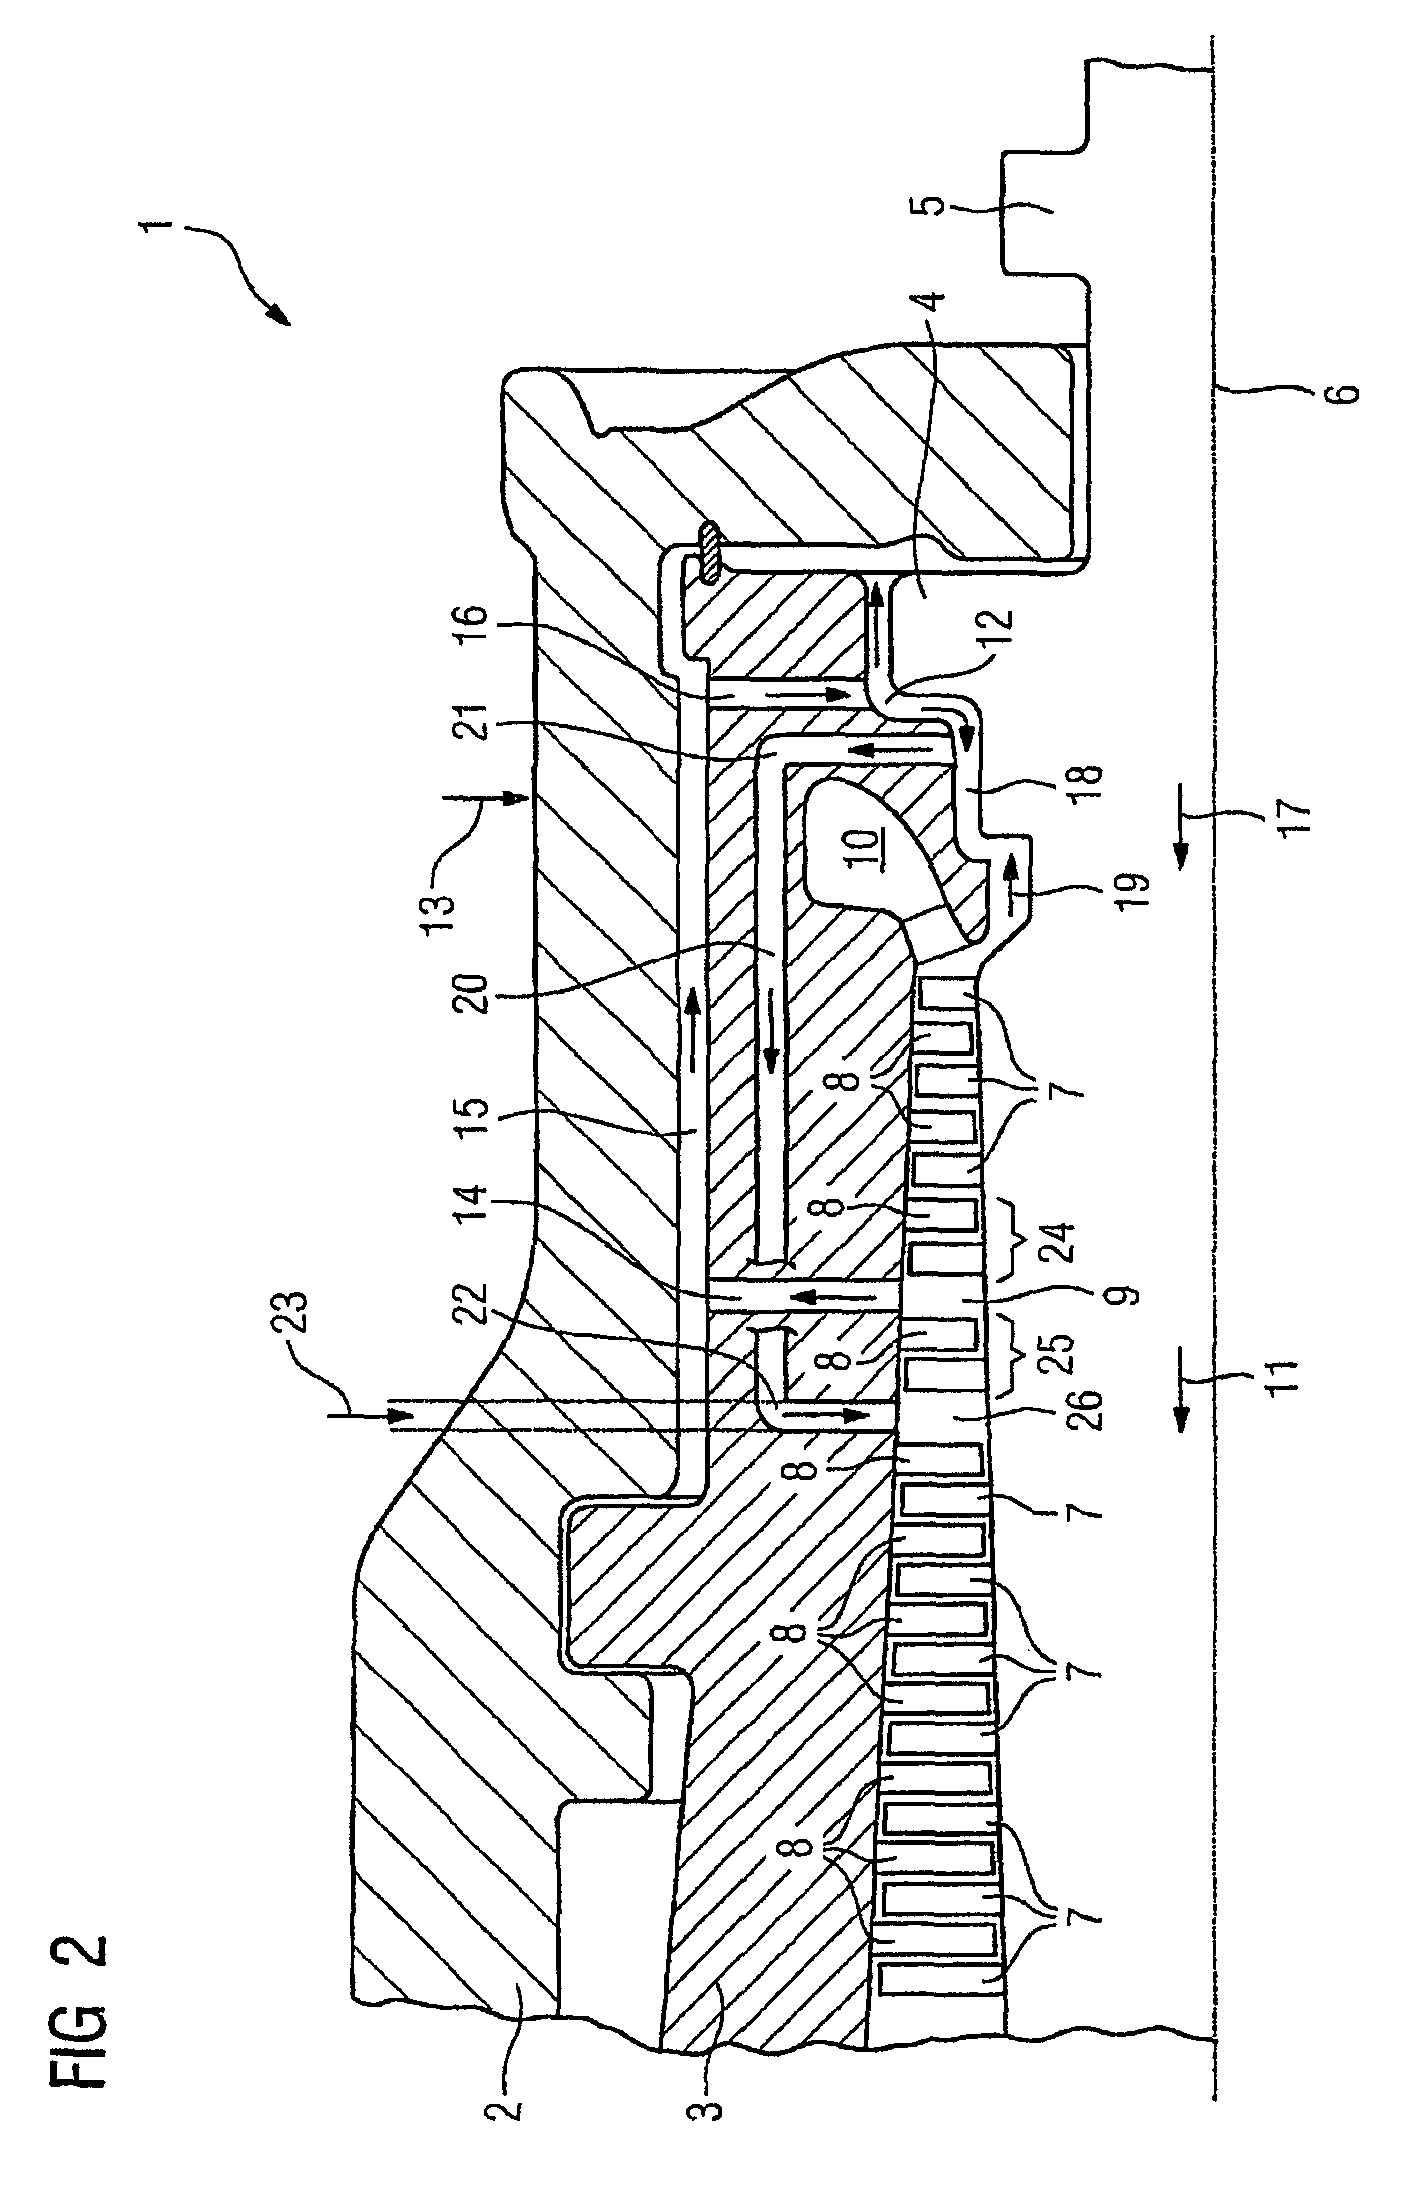 Steam turbine and method for operation of a steam turbine